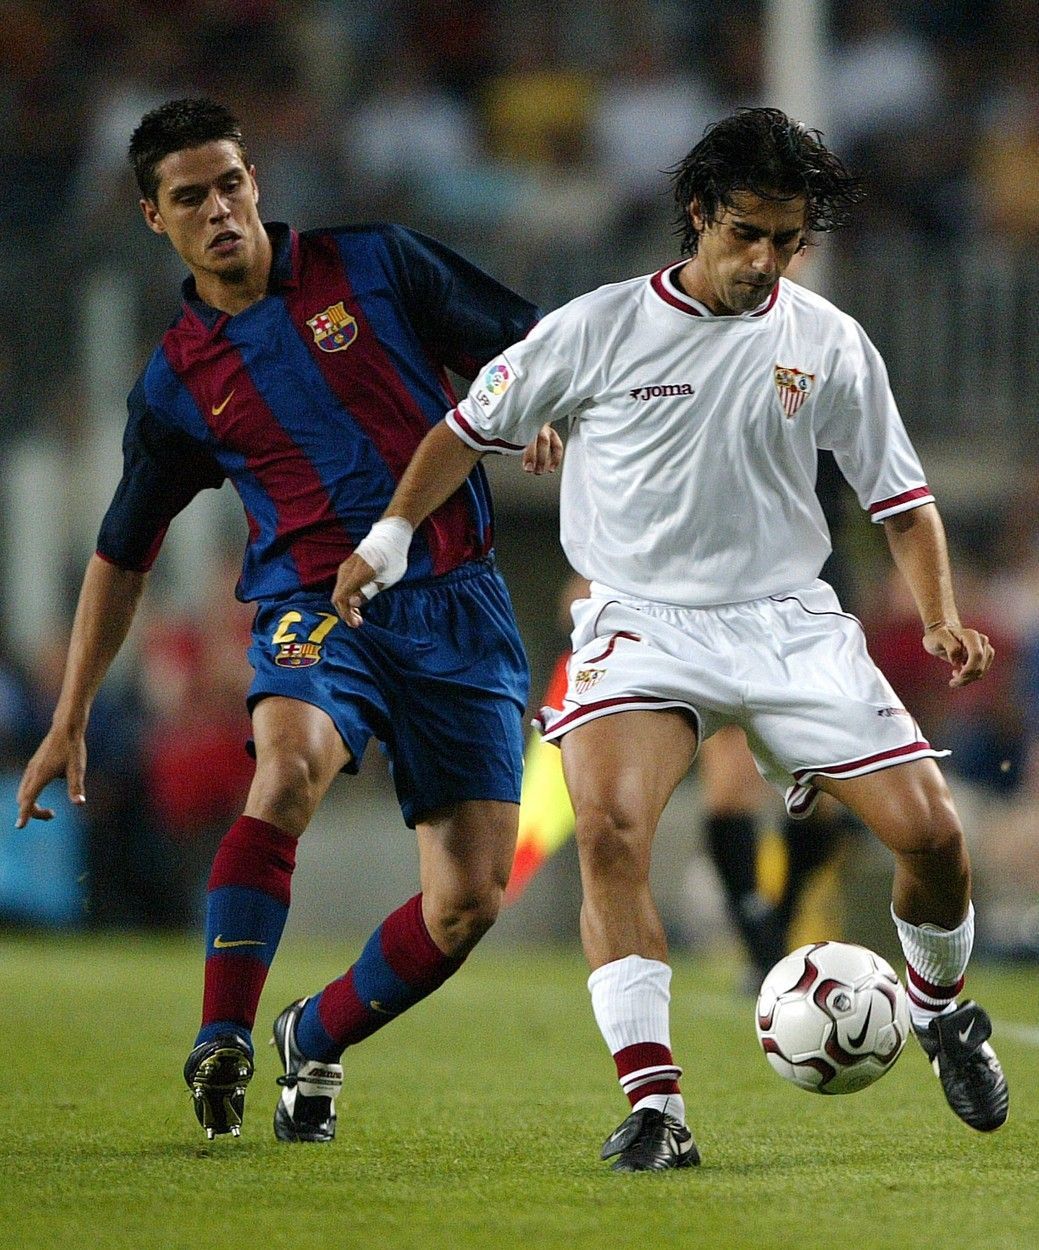 FC Barcelona's Oscar Lopez (L) fights for the ball with Sevilla's Gallardo (R) during their Spanish League soccer match at the Camp Nou stadium in Barcelona, 02 September 2003